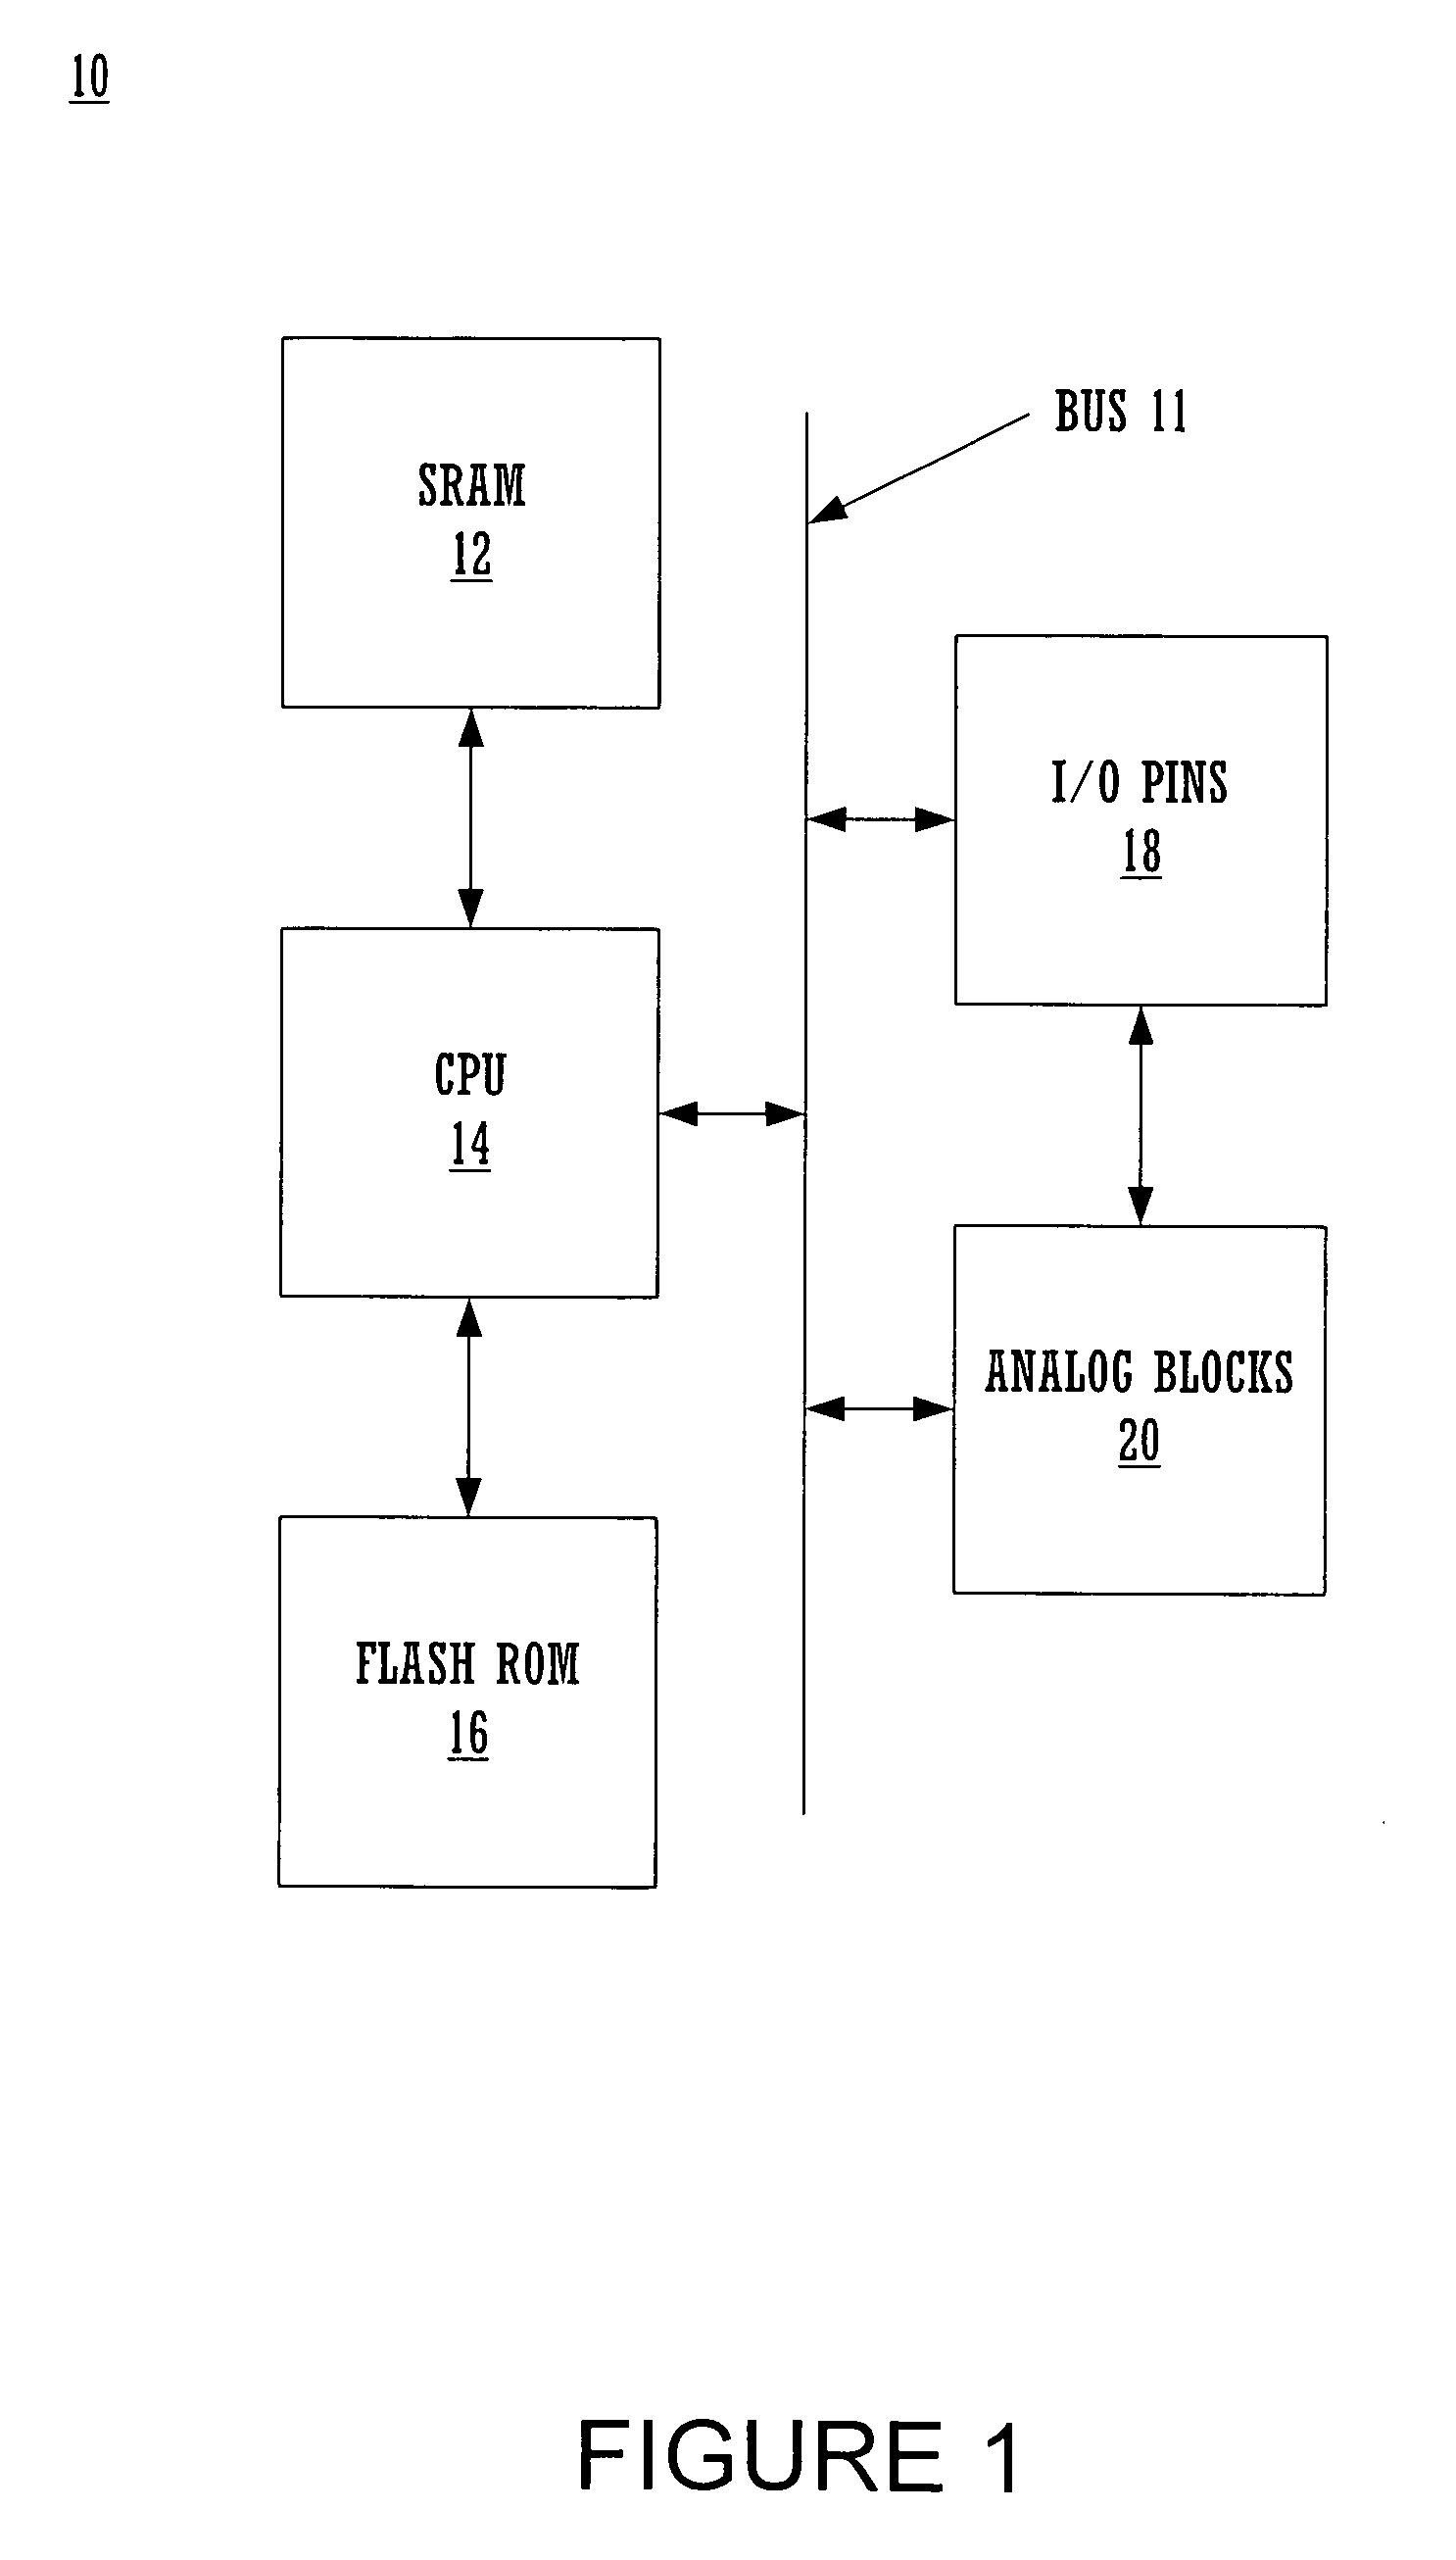 Architecture for synchronizing and resetting clock signals supplied to multiple programmable analog blocks